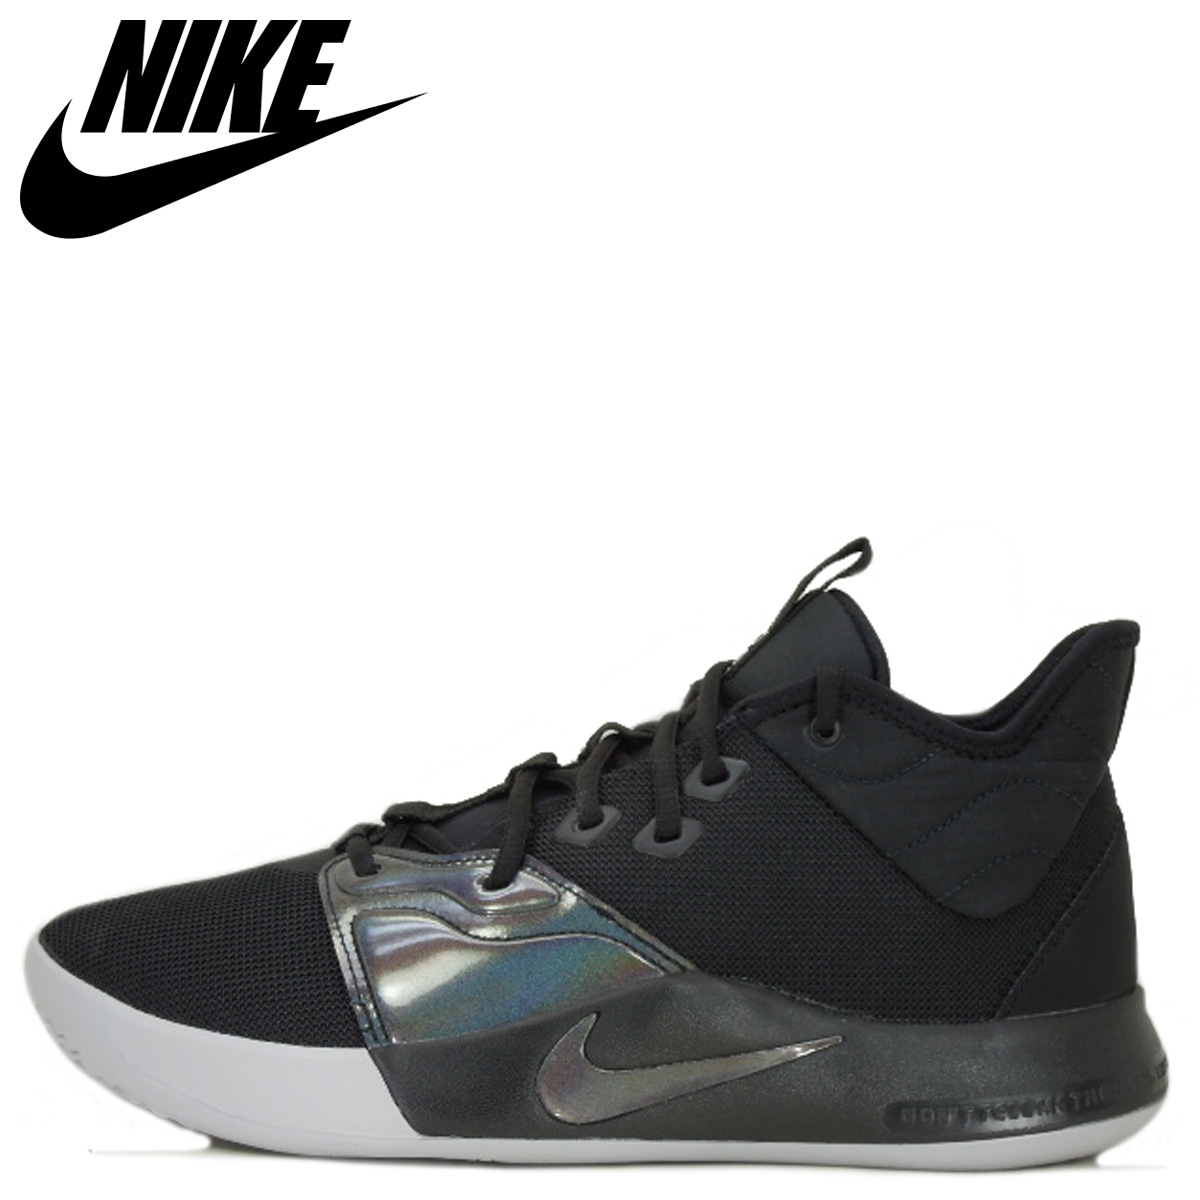 all black pg3 Kevin Durant shoes on sale